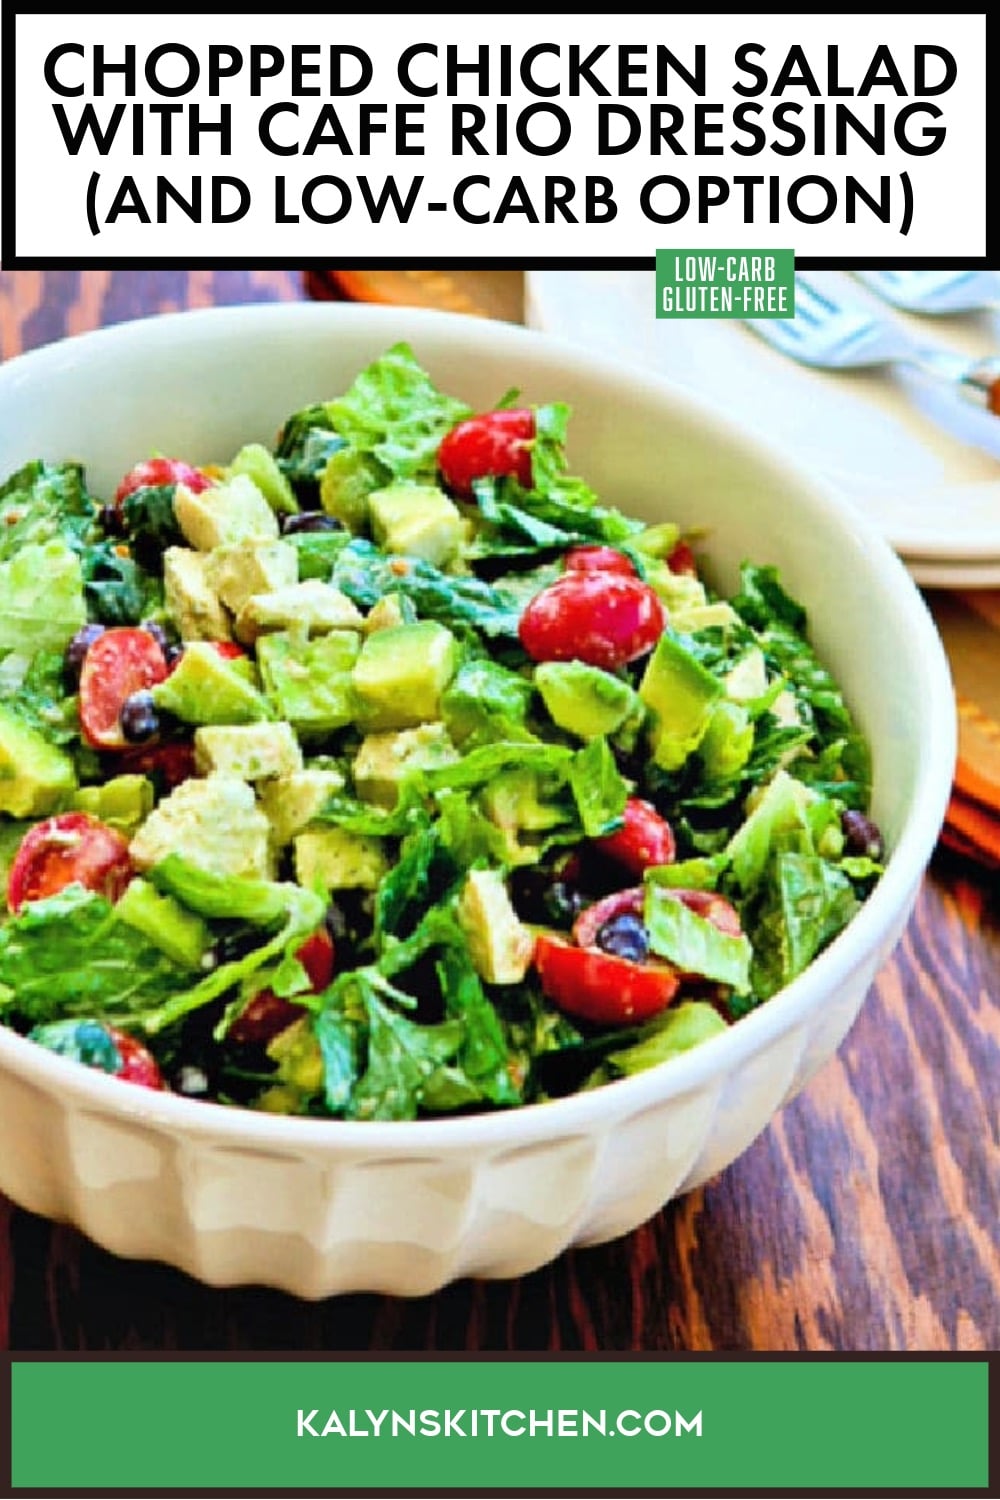 Pinterest image of Chopped Chicken Salad (with Cafe Rio Dressing)